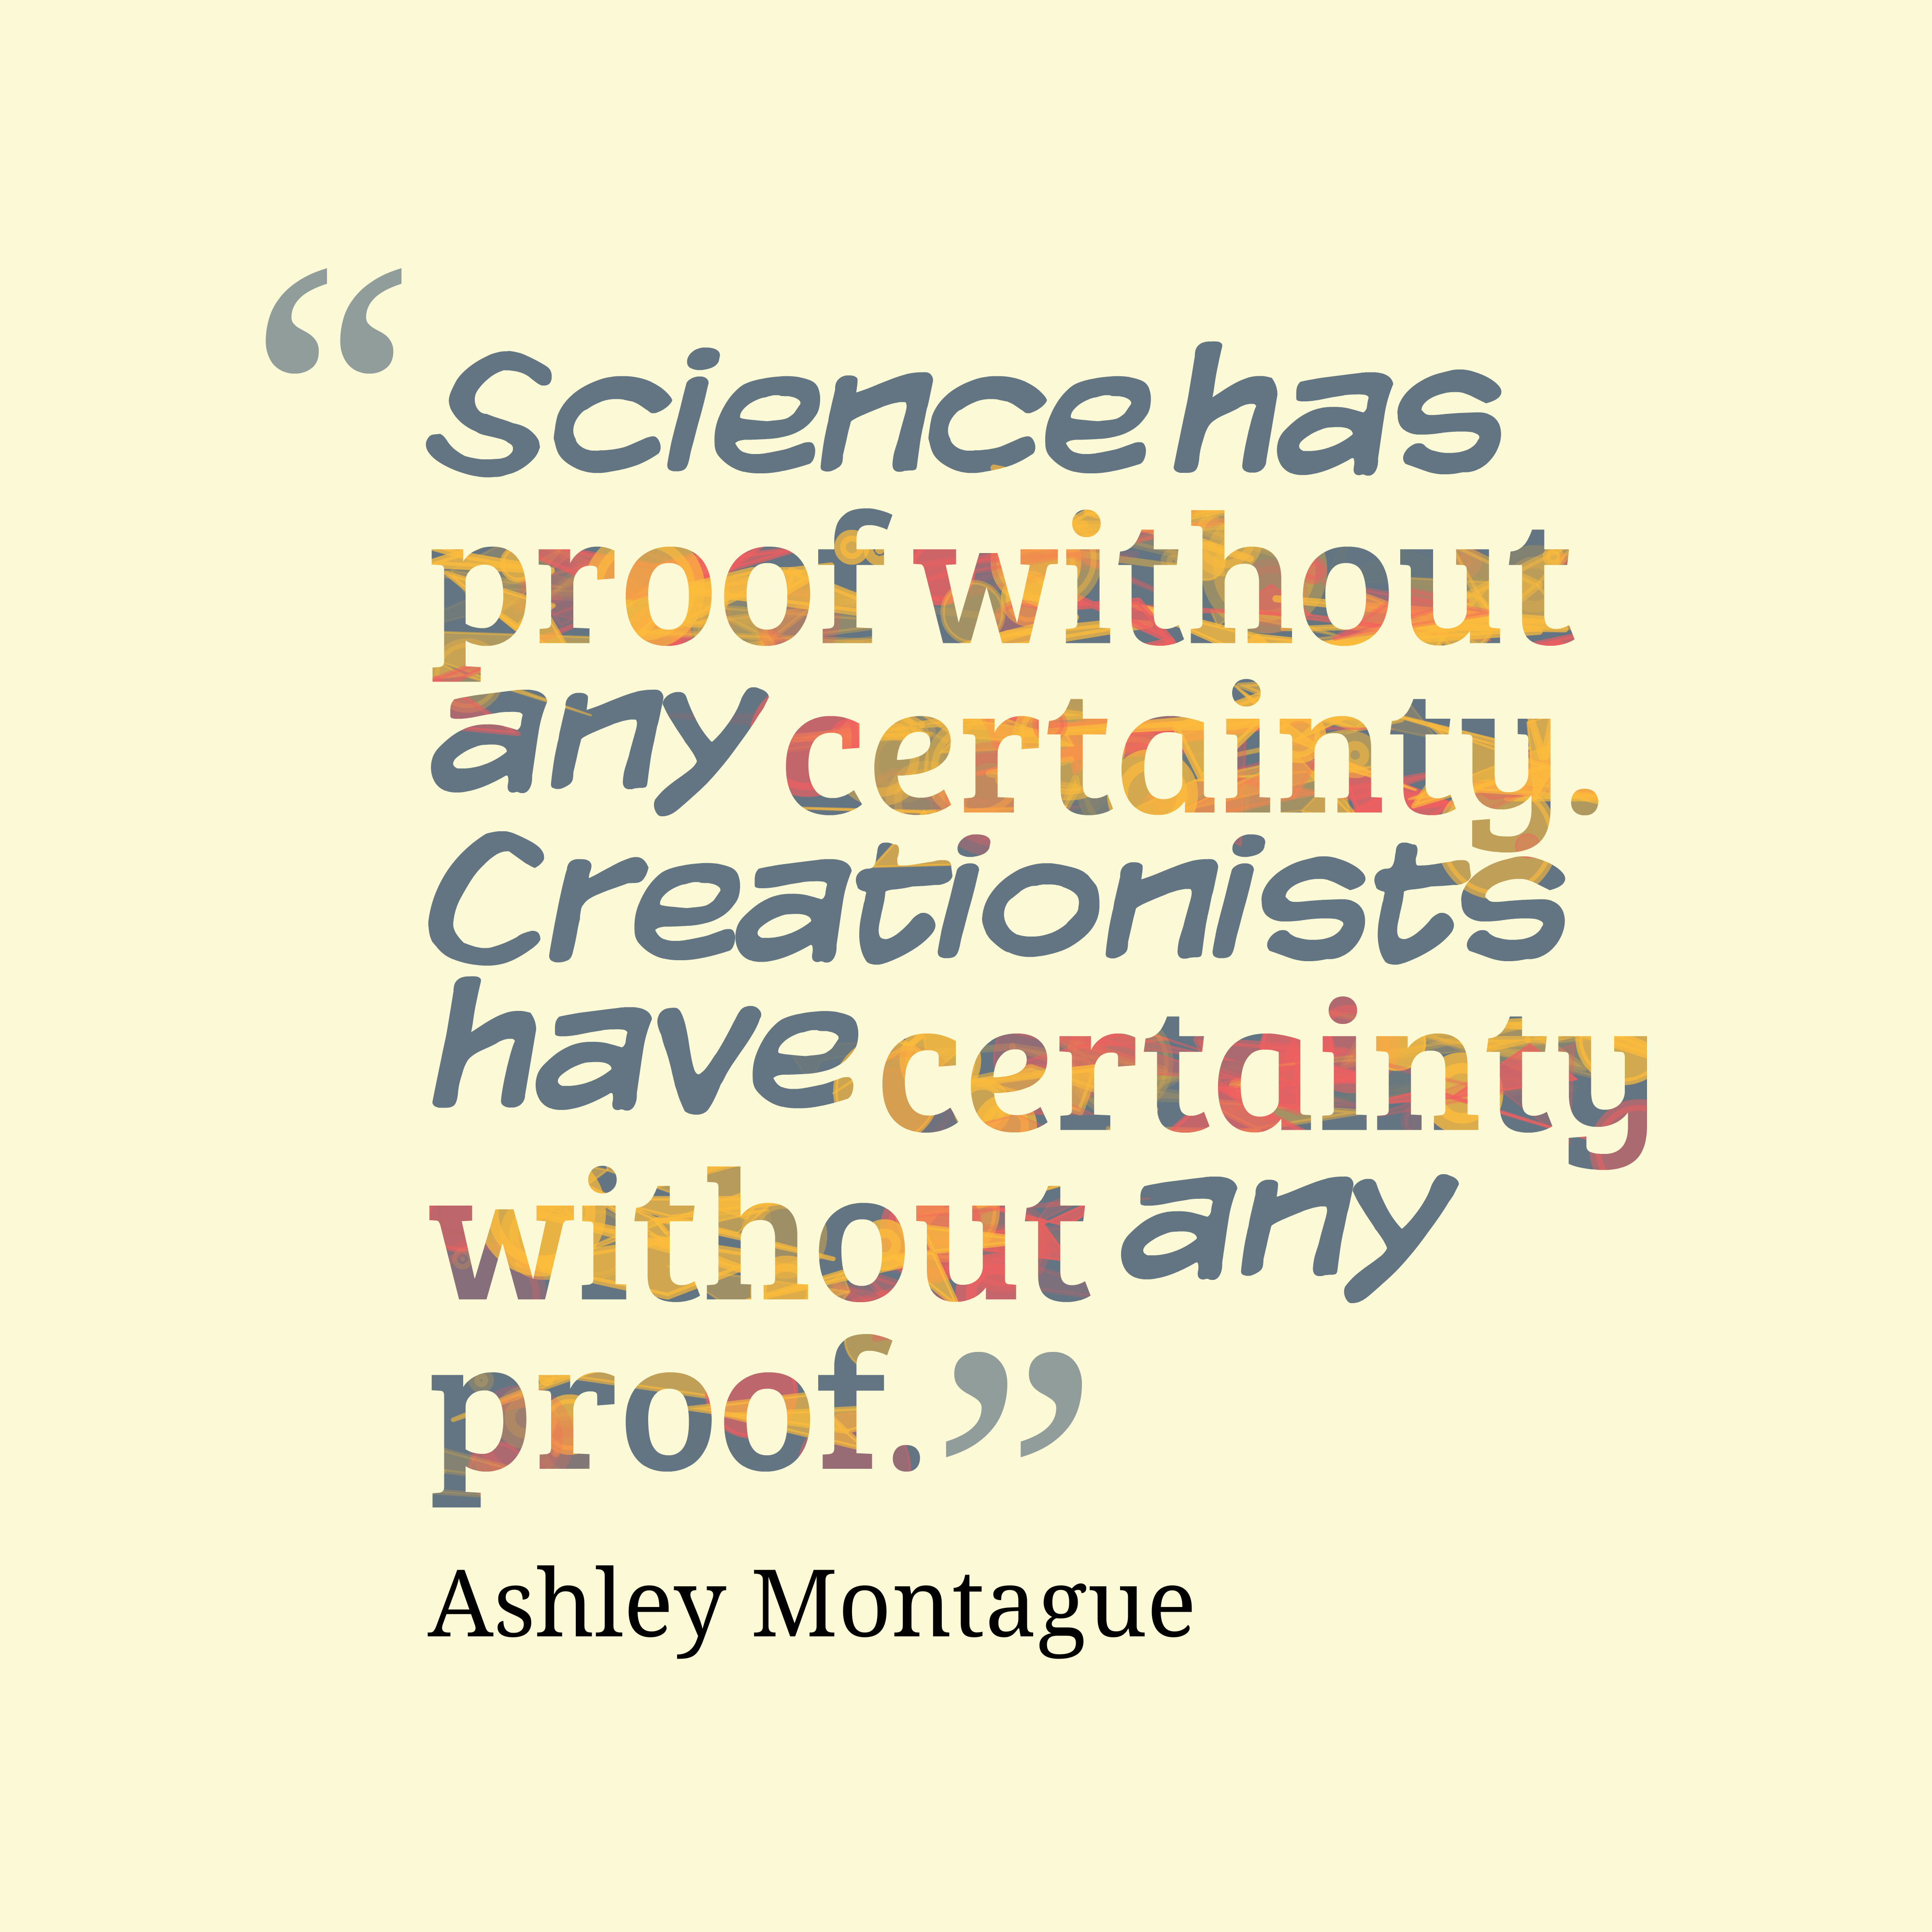 science proof without any certainty creationists have certainity without any proof. ashley montague